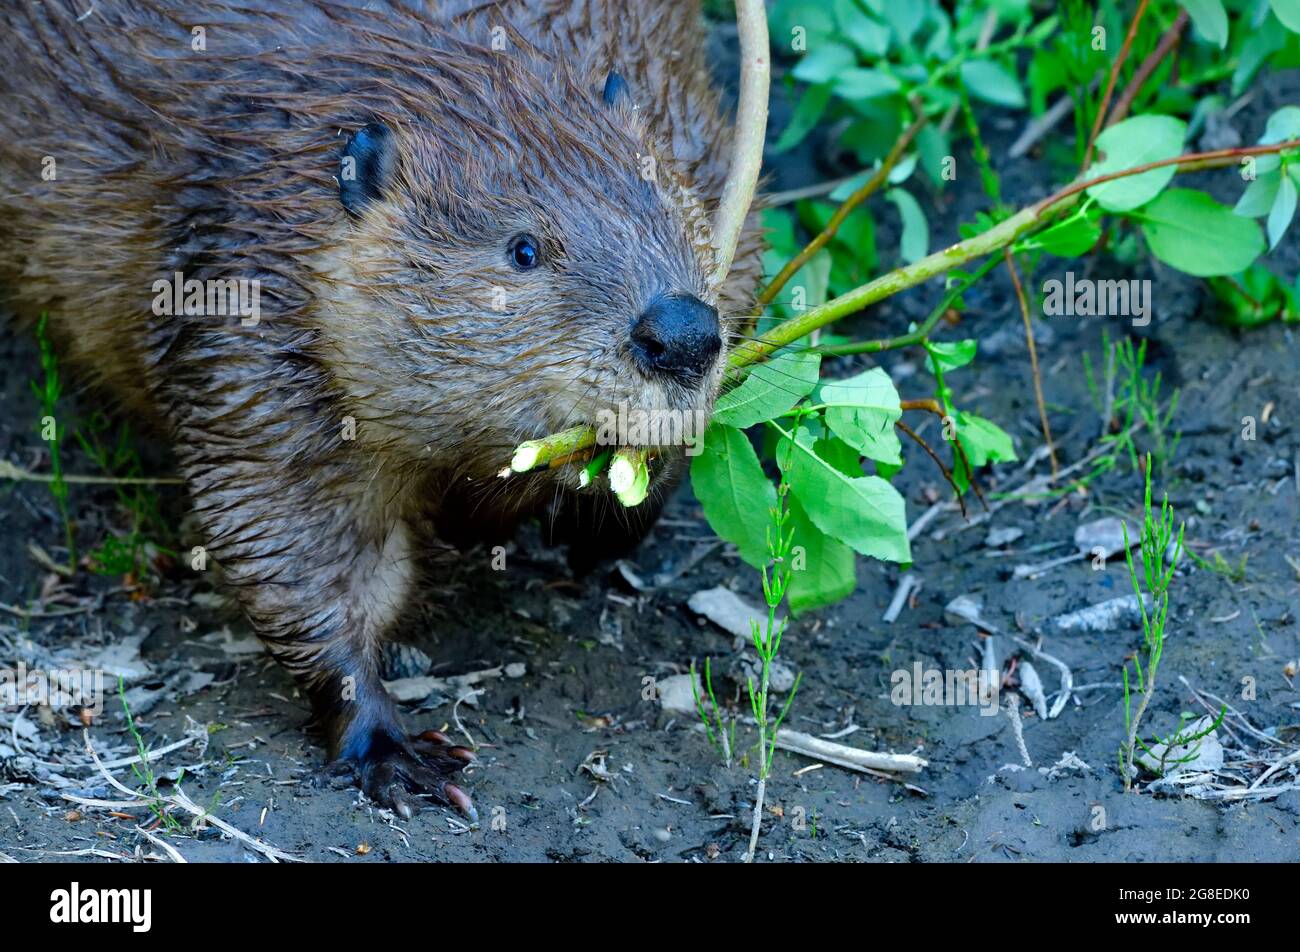 A close up view of an adult wild beaver 'Castor canadensis', collecting willow saplings to eat at a later time.in rural Alberta Canada Stock Photo